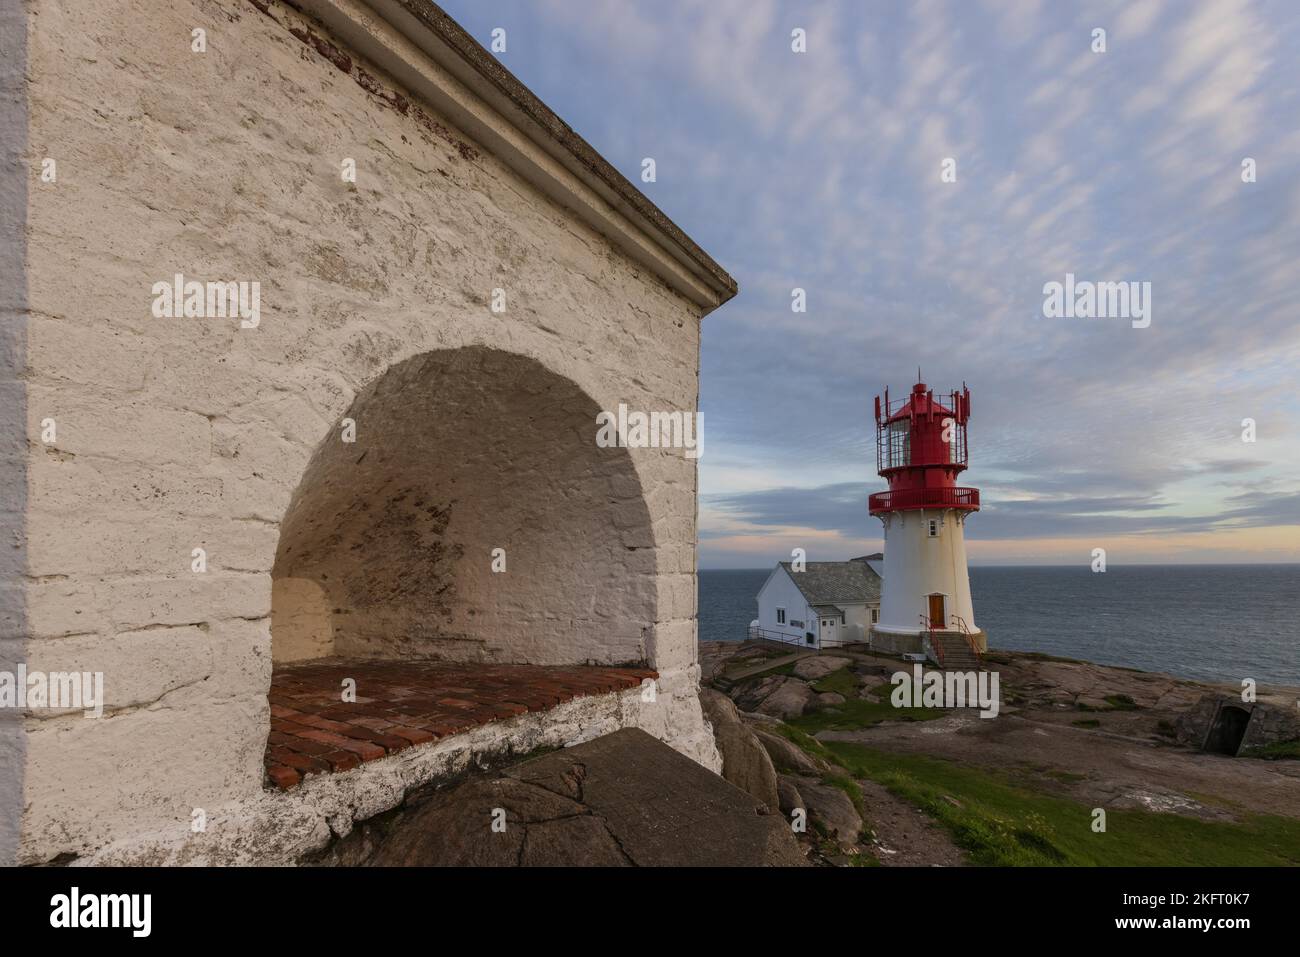 Evening atmosphere at Lindesnes Lighthouse, Norway, Europe Stock Photo